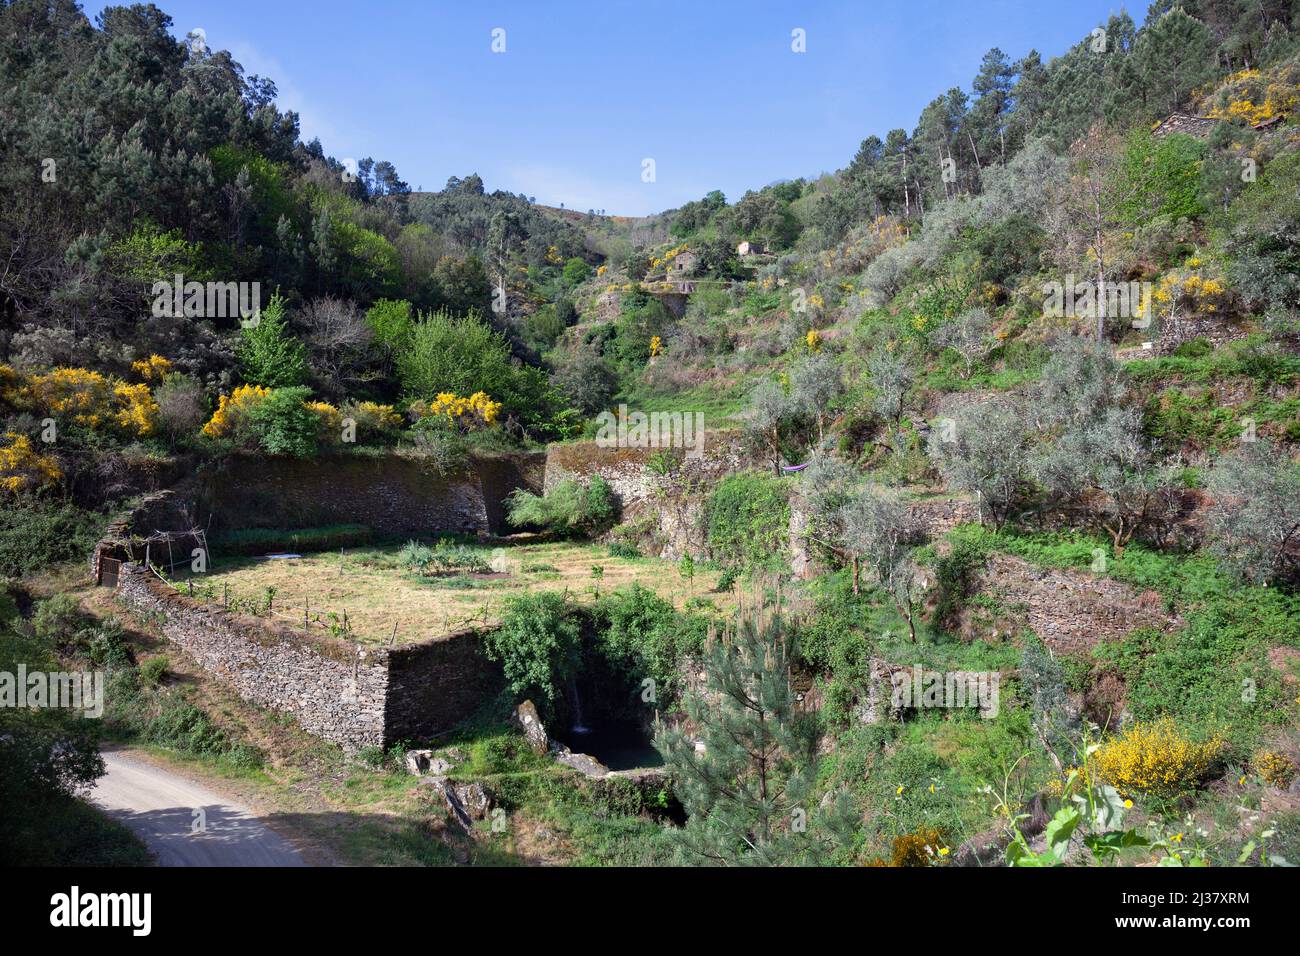 Europe, Portugal, District of Coimbra, Near Góis, 'The Goatshed' (near Colmeal), The Waterfall and Field. Stock Photo